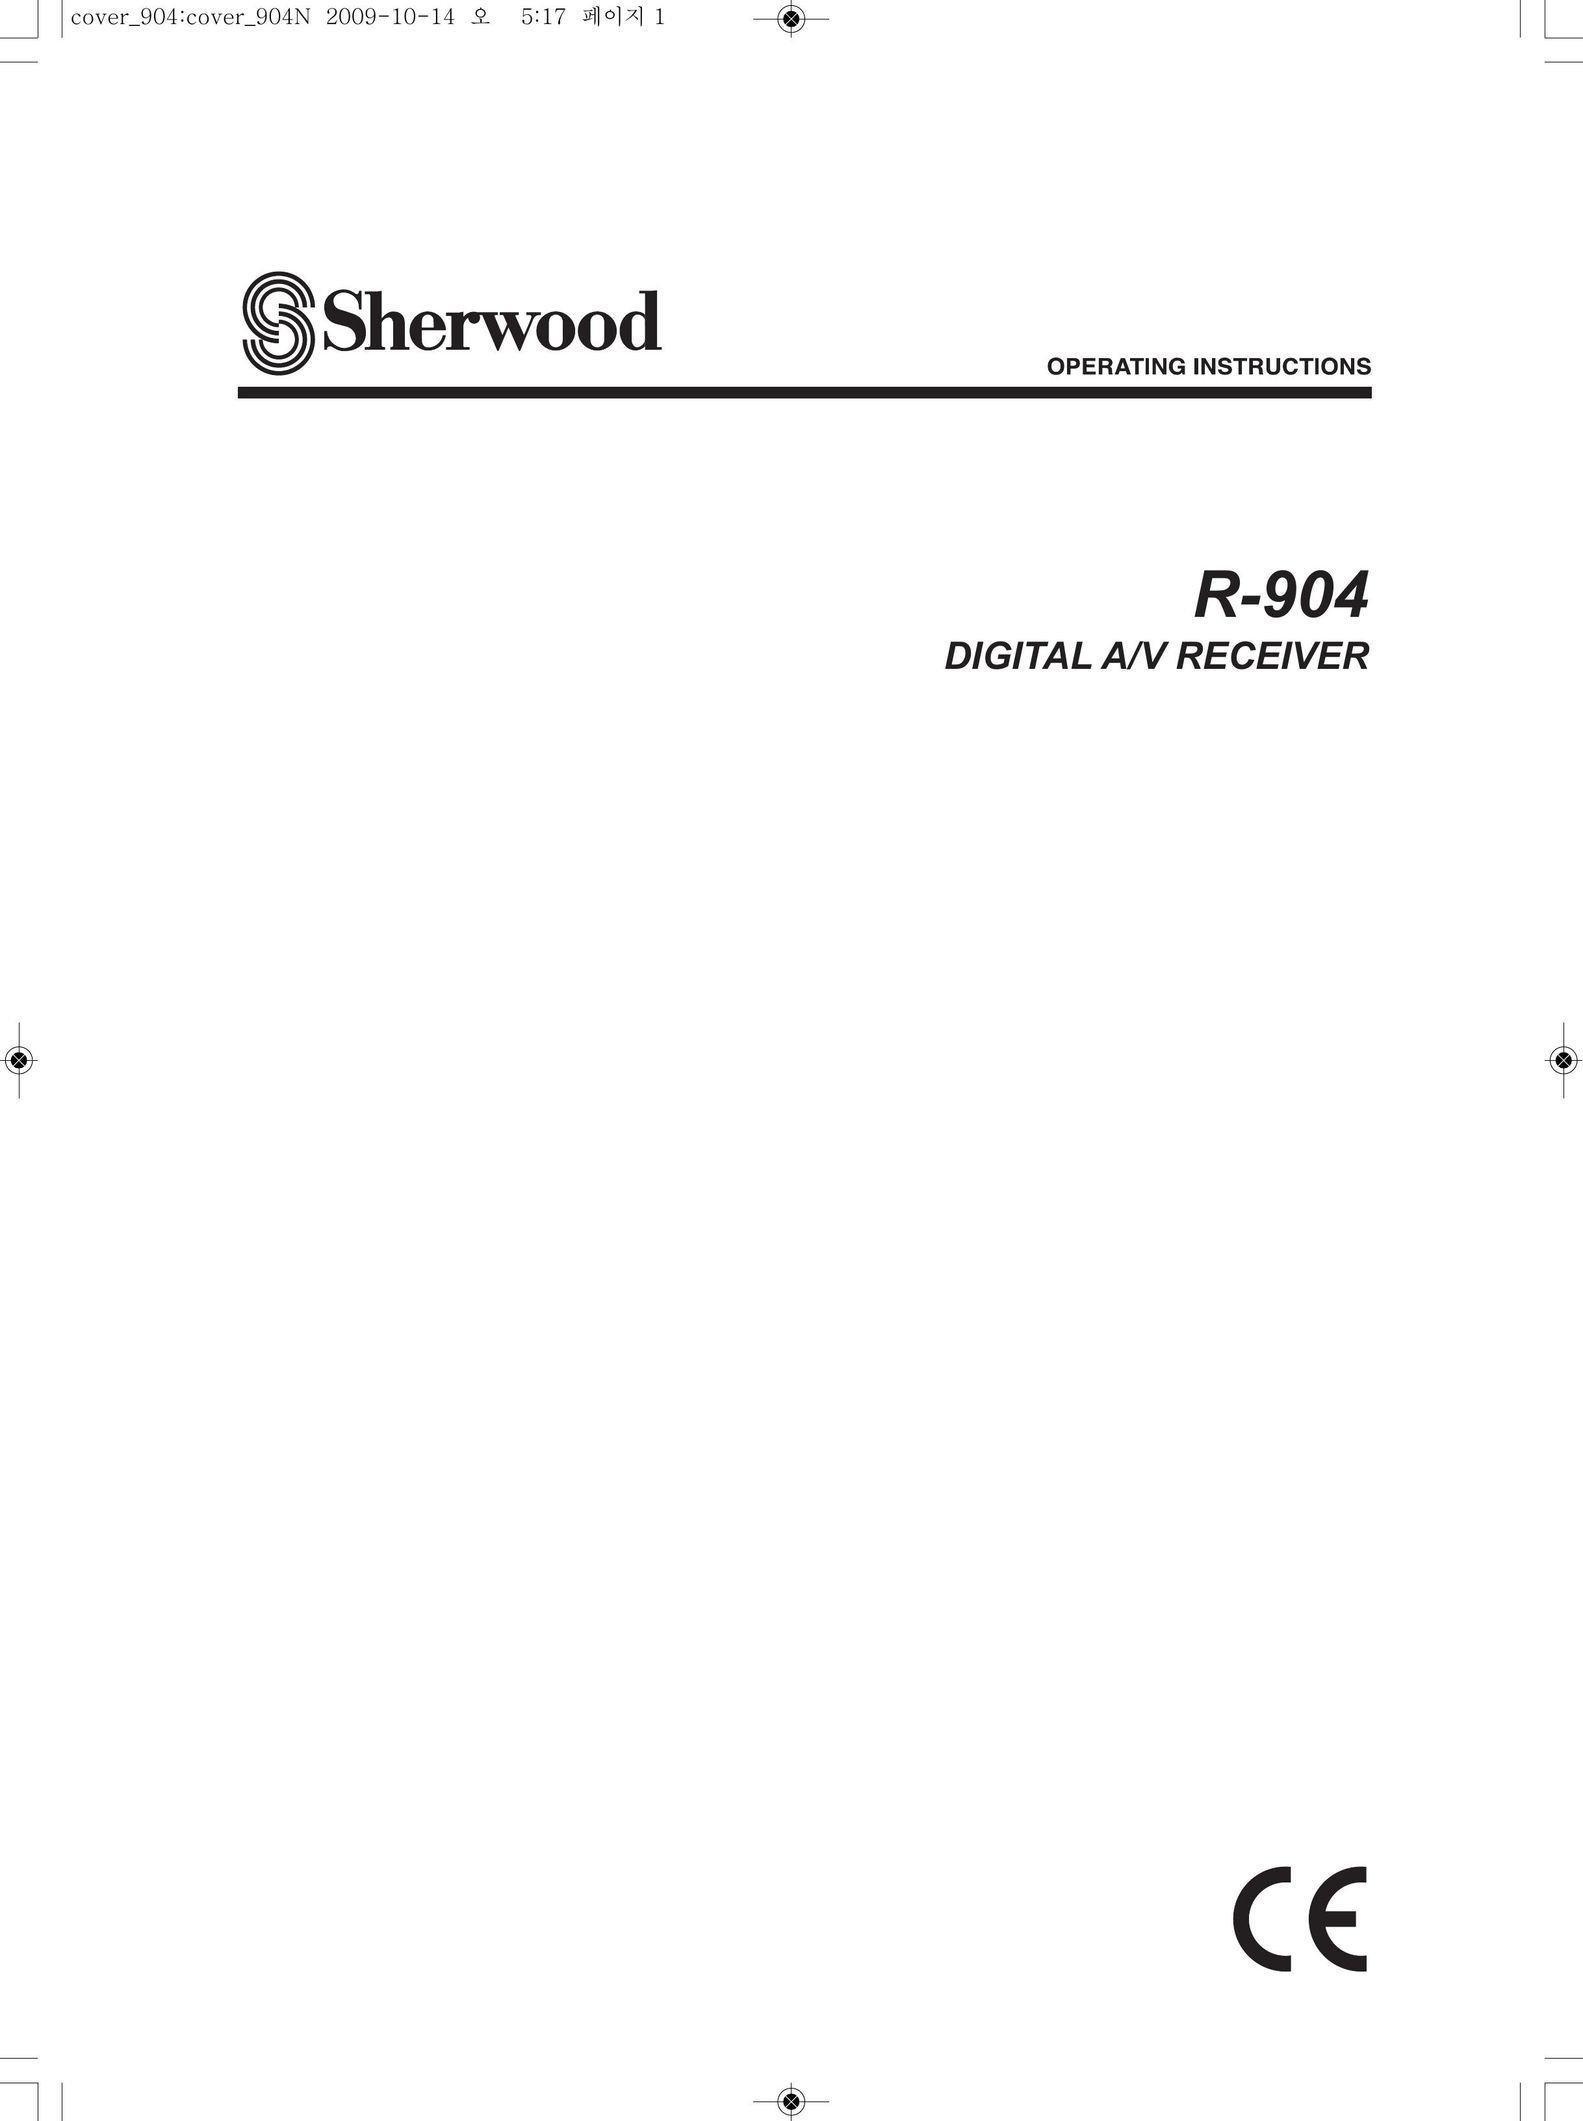 Sherwood R-904 Stereo Receiver User Manual